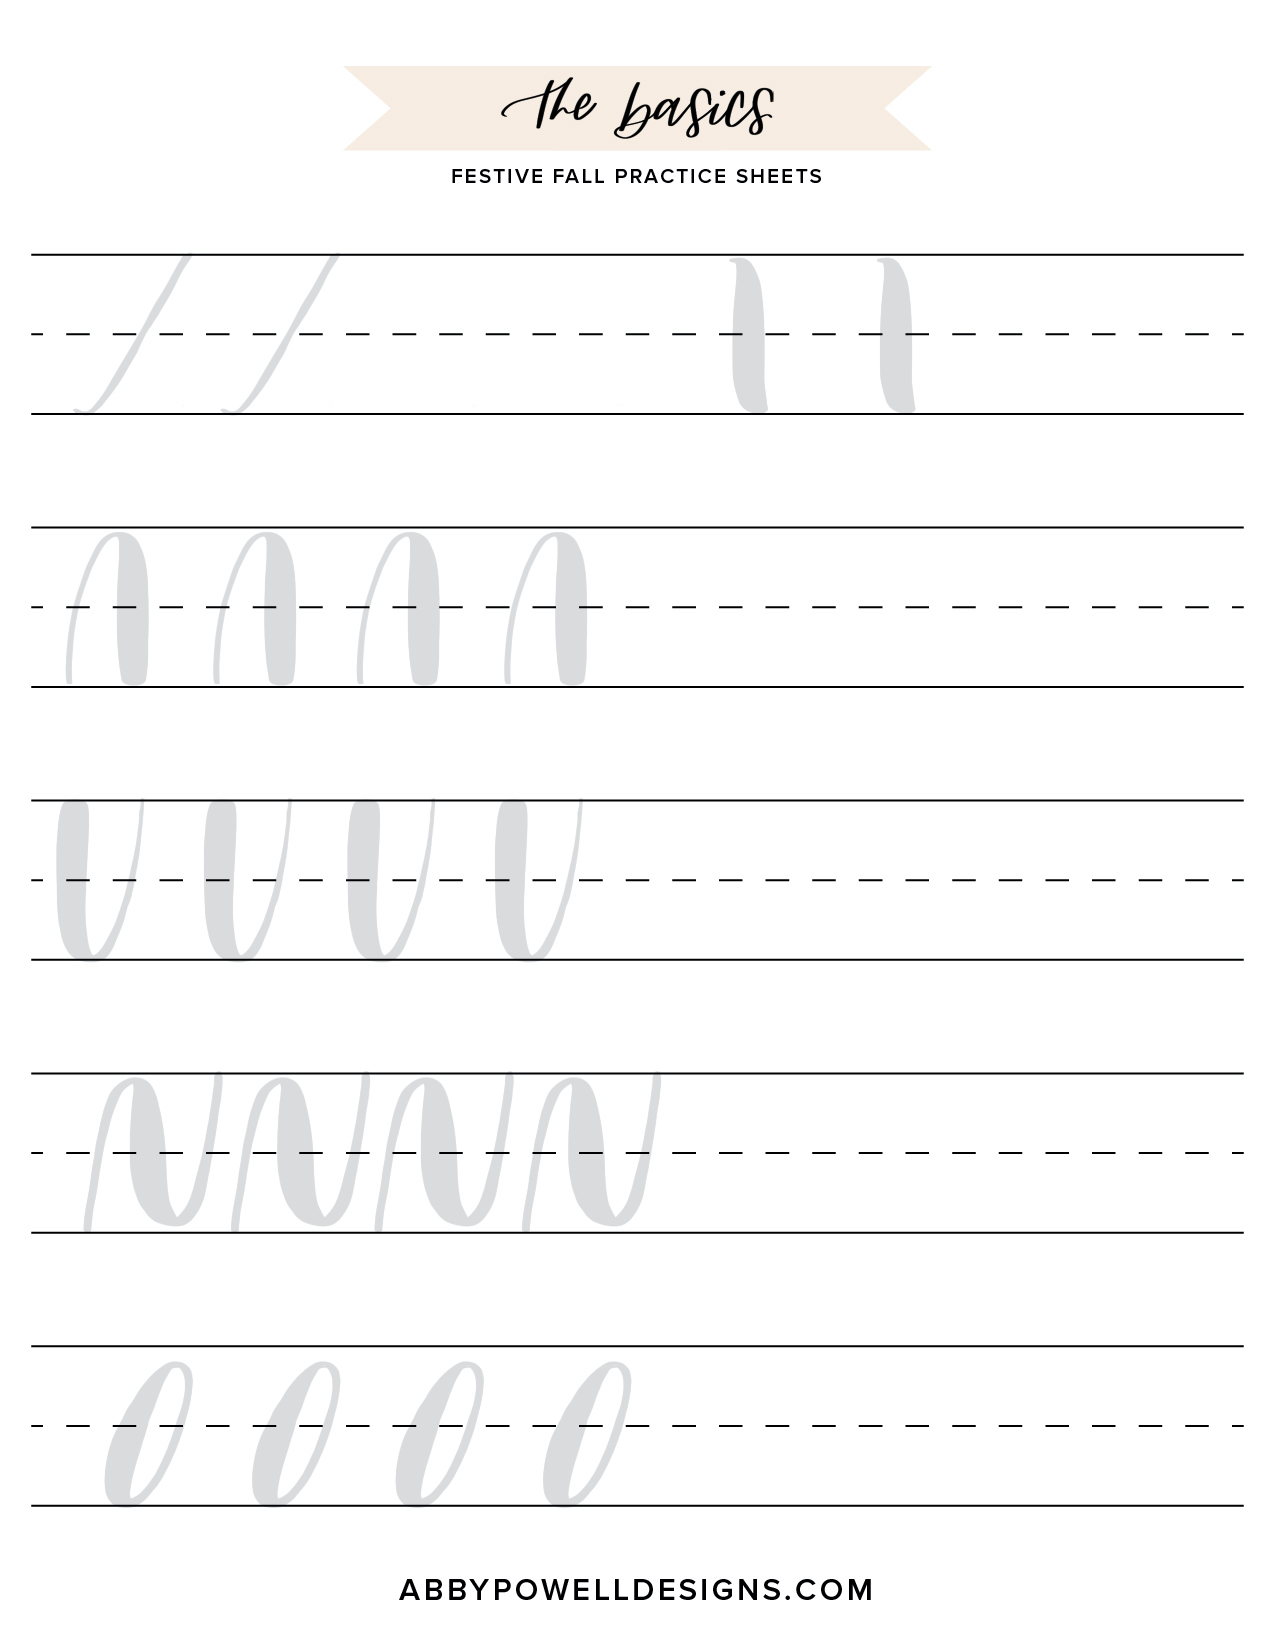 Learn the basics of lettering with this fall practice sheet from Abby Powell